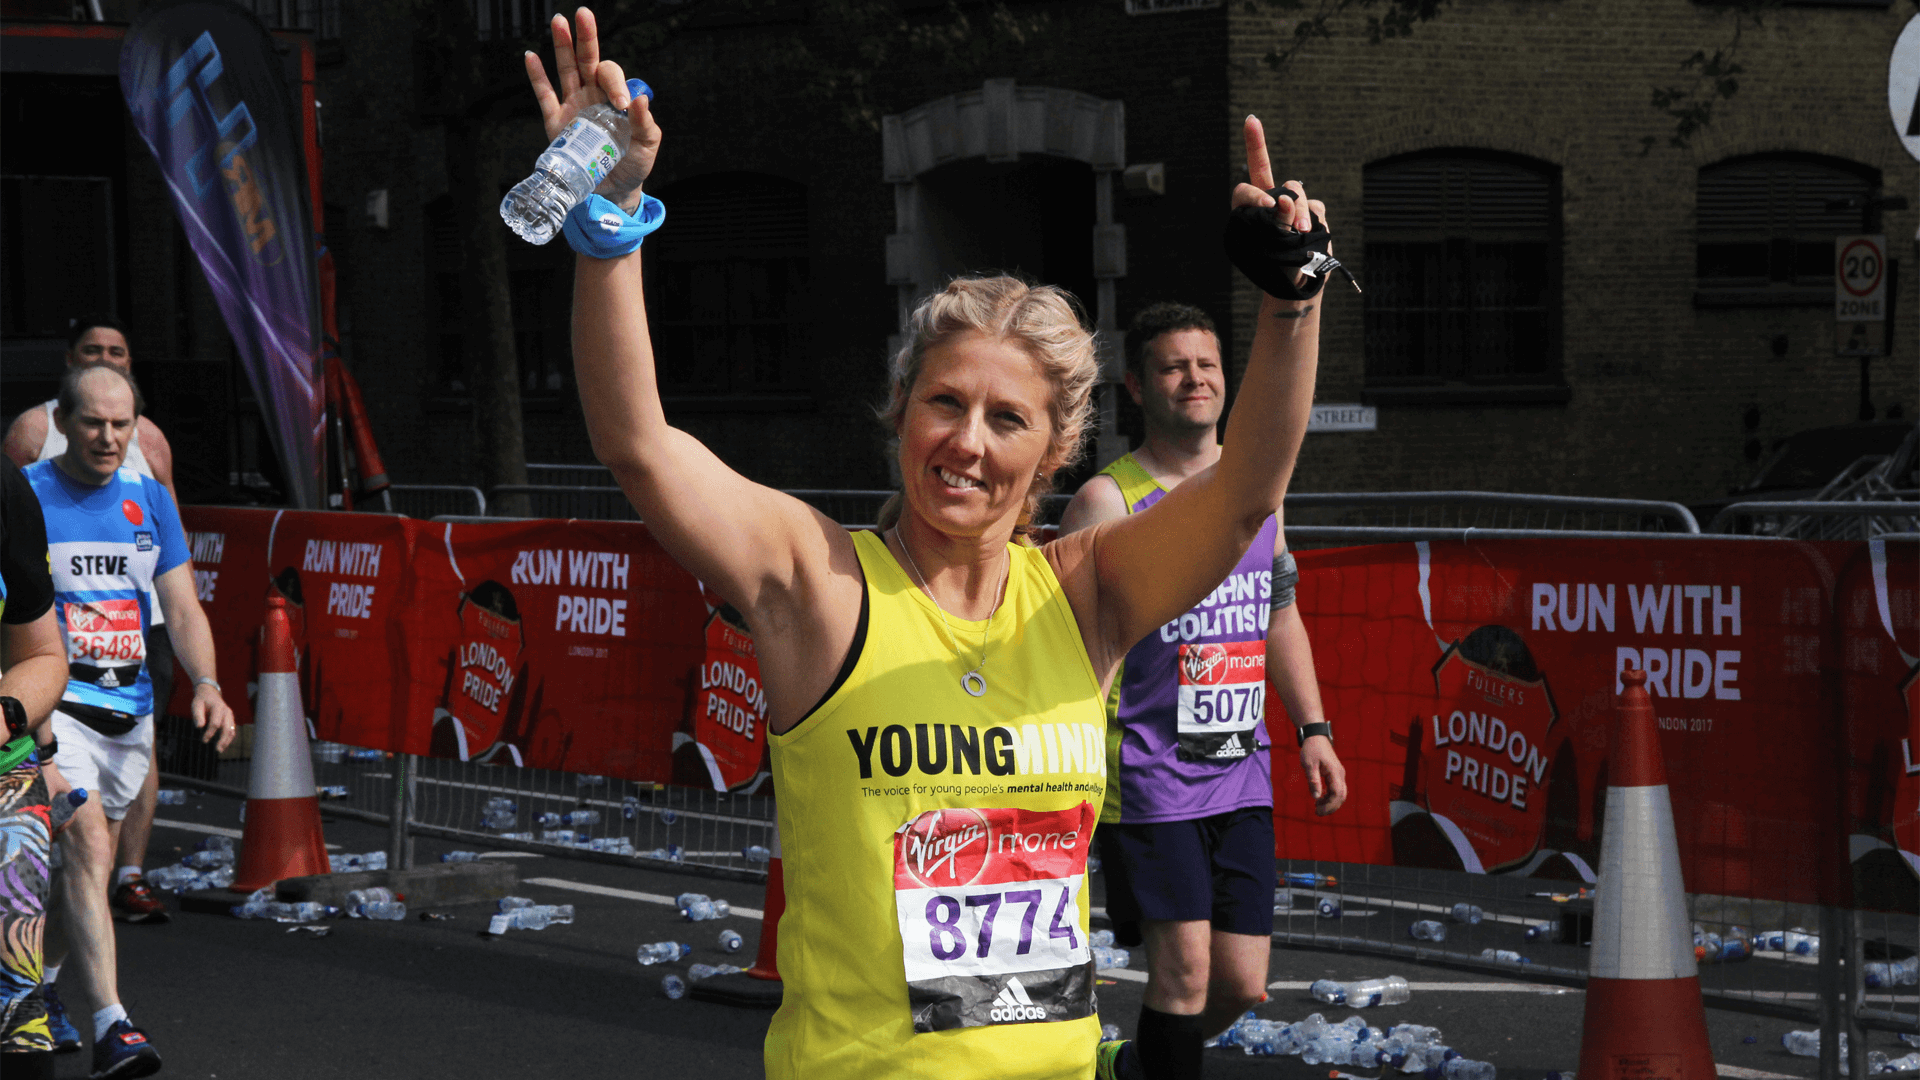 a woman runner and supporter of YoungMinds smile and wave at the camera during a running event